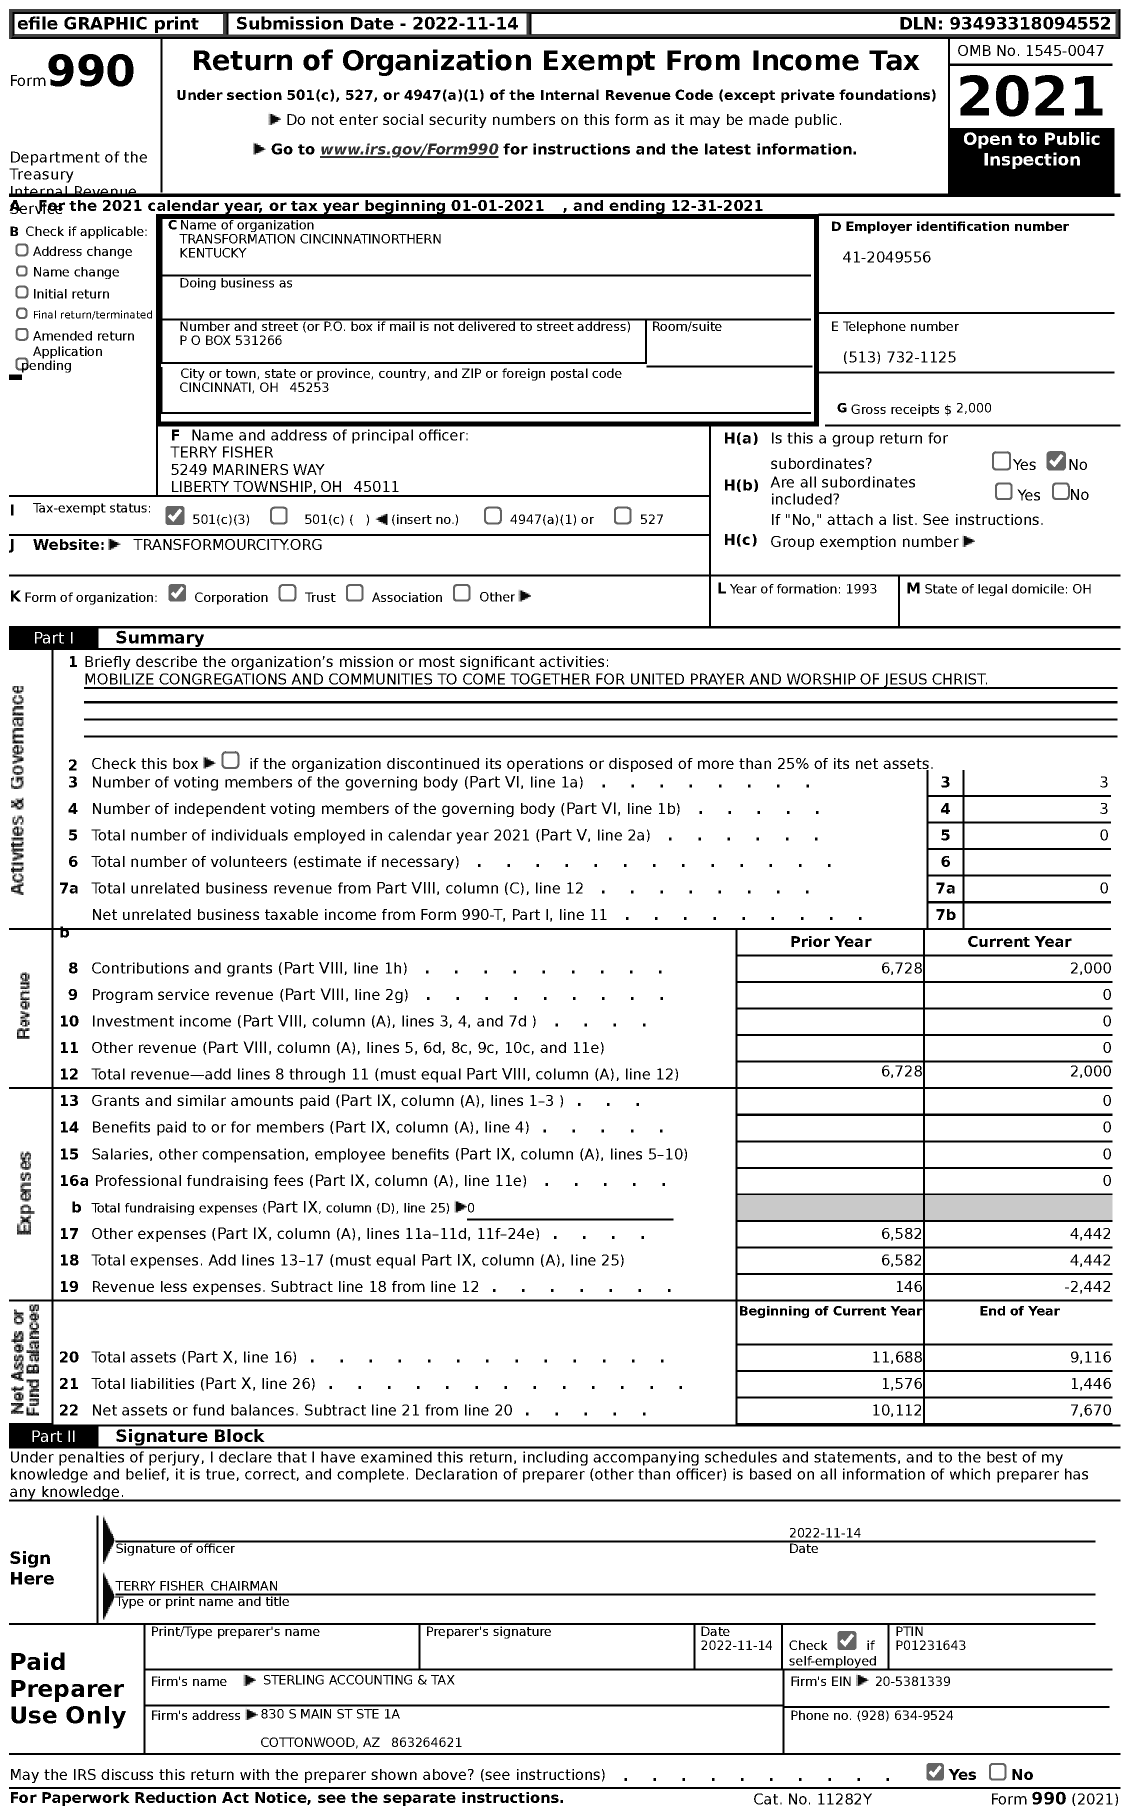 Image of first page of 2021 Form 990 for Transformation Cincinnatinorthern Kentucky